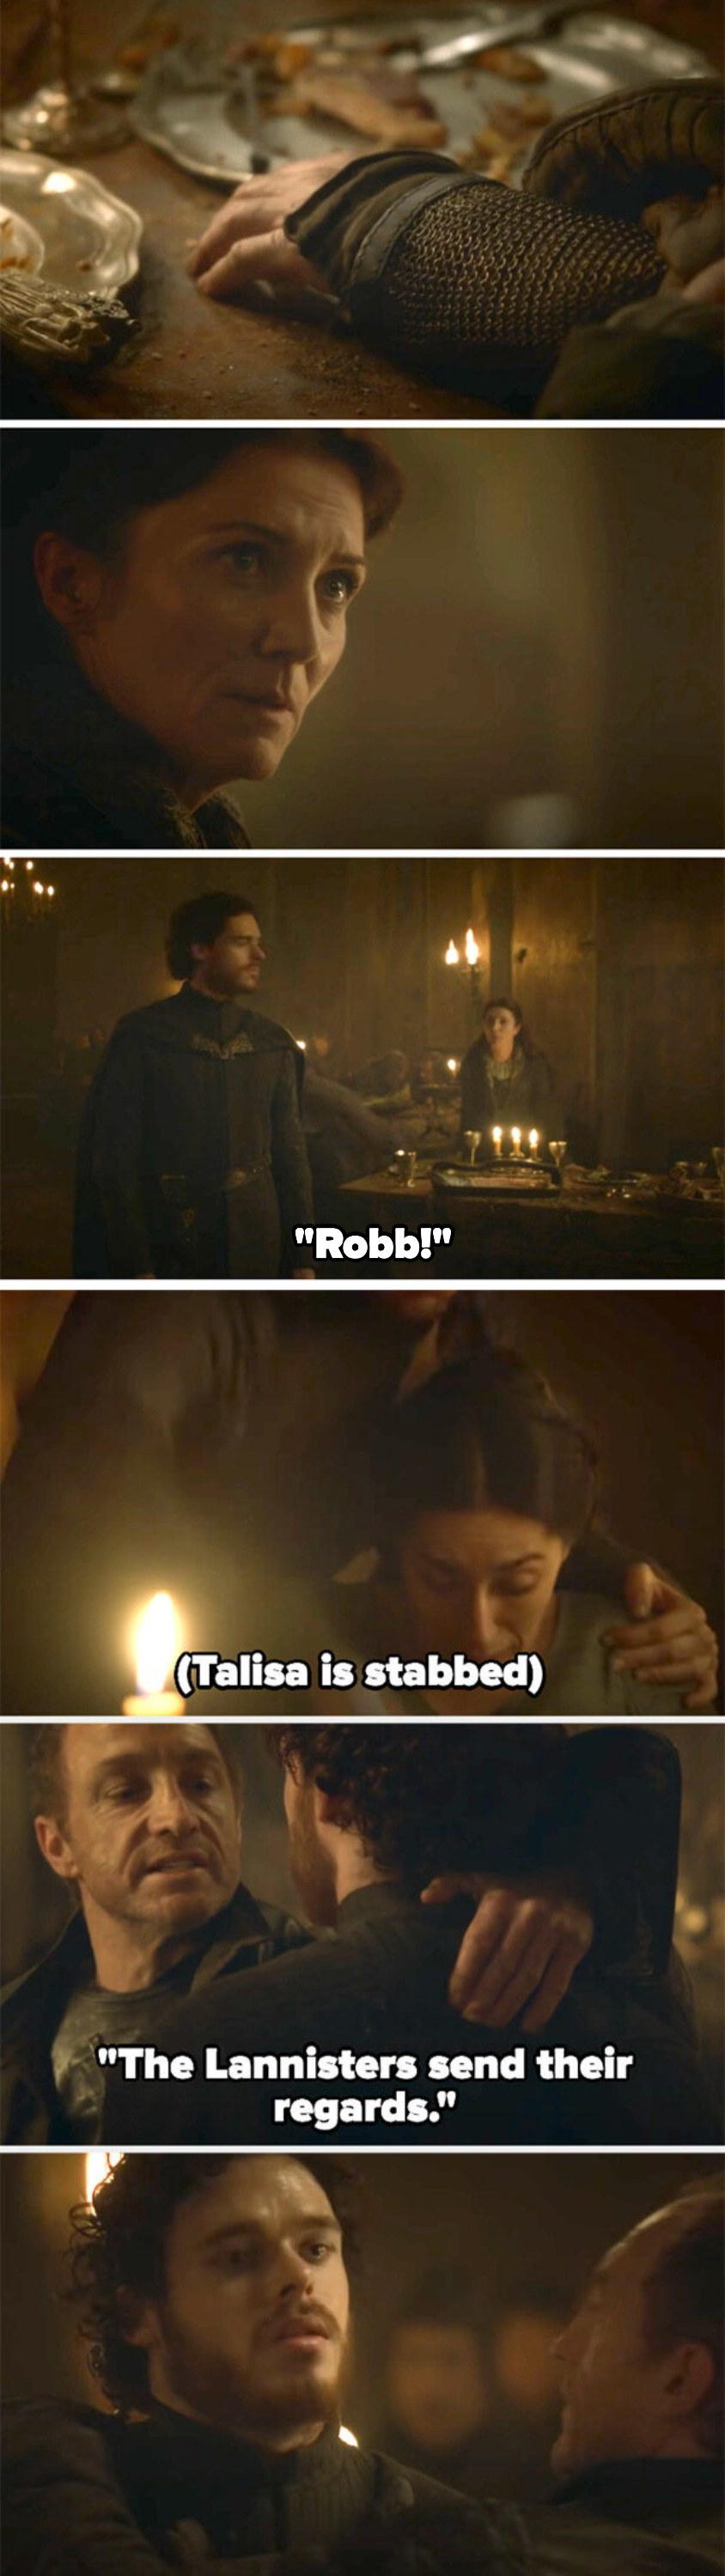 Talissa is stabbed in the stomach as Catelyn realizes something is wrong, and Roose tells Robb the Lannisters send their regards and stabs him